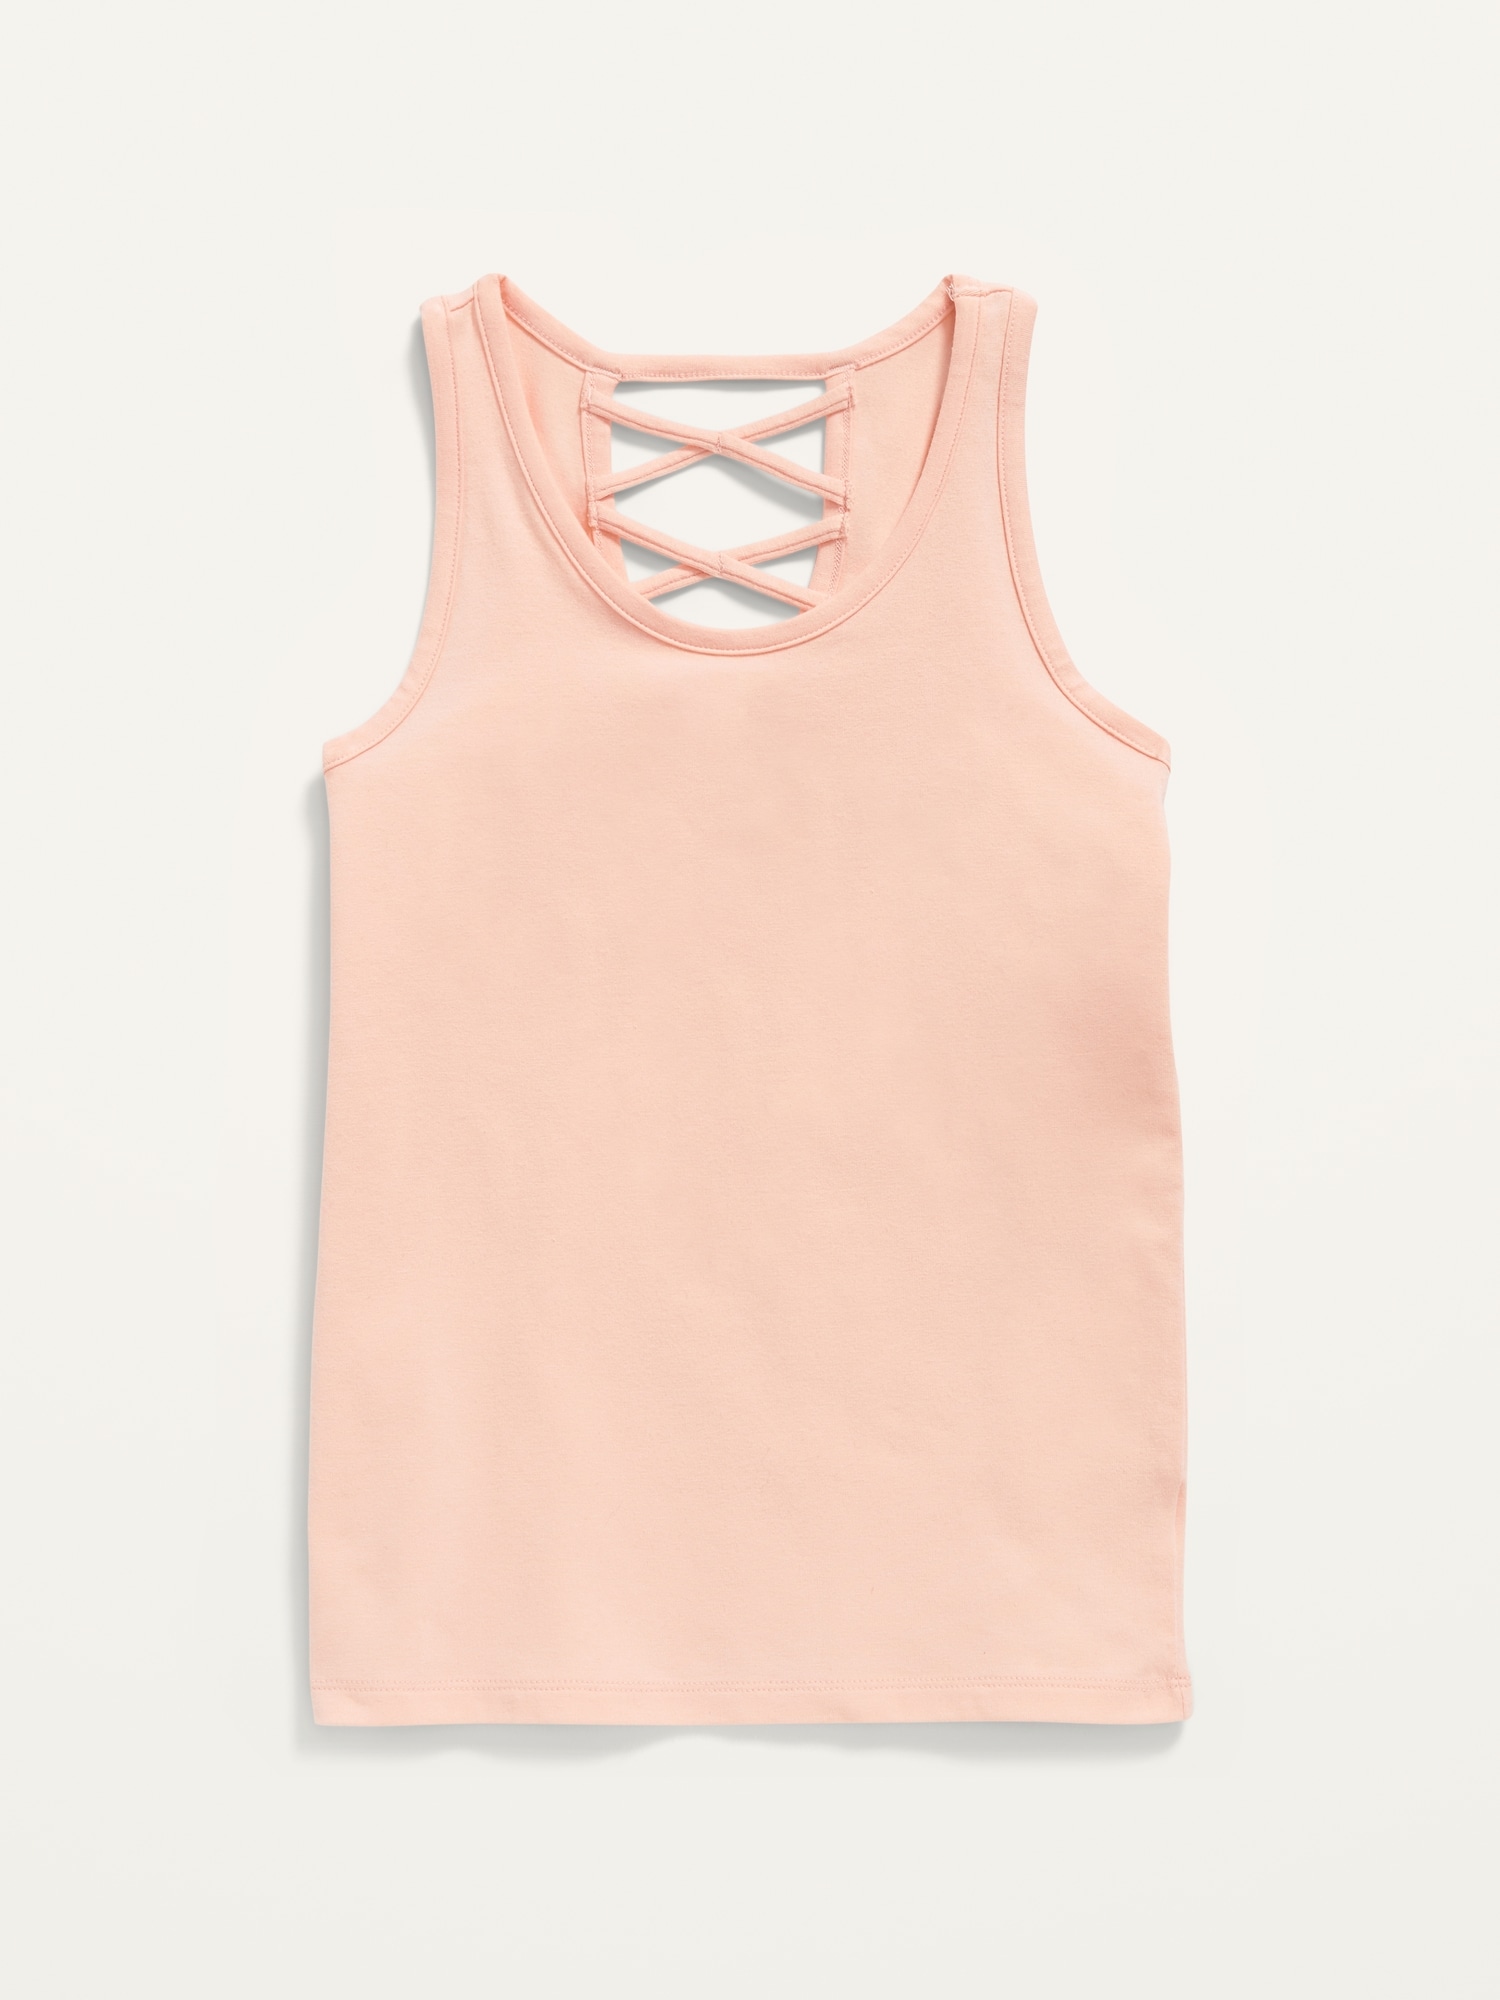 Fitted Strappy Tank Top for Girls | Old Navy